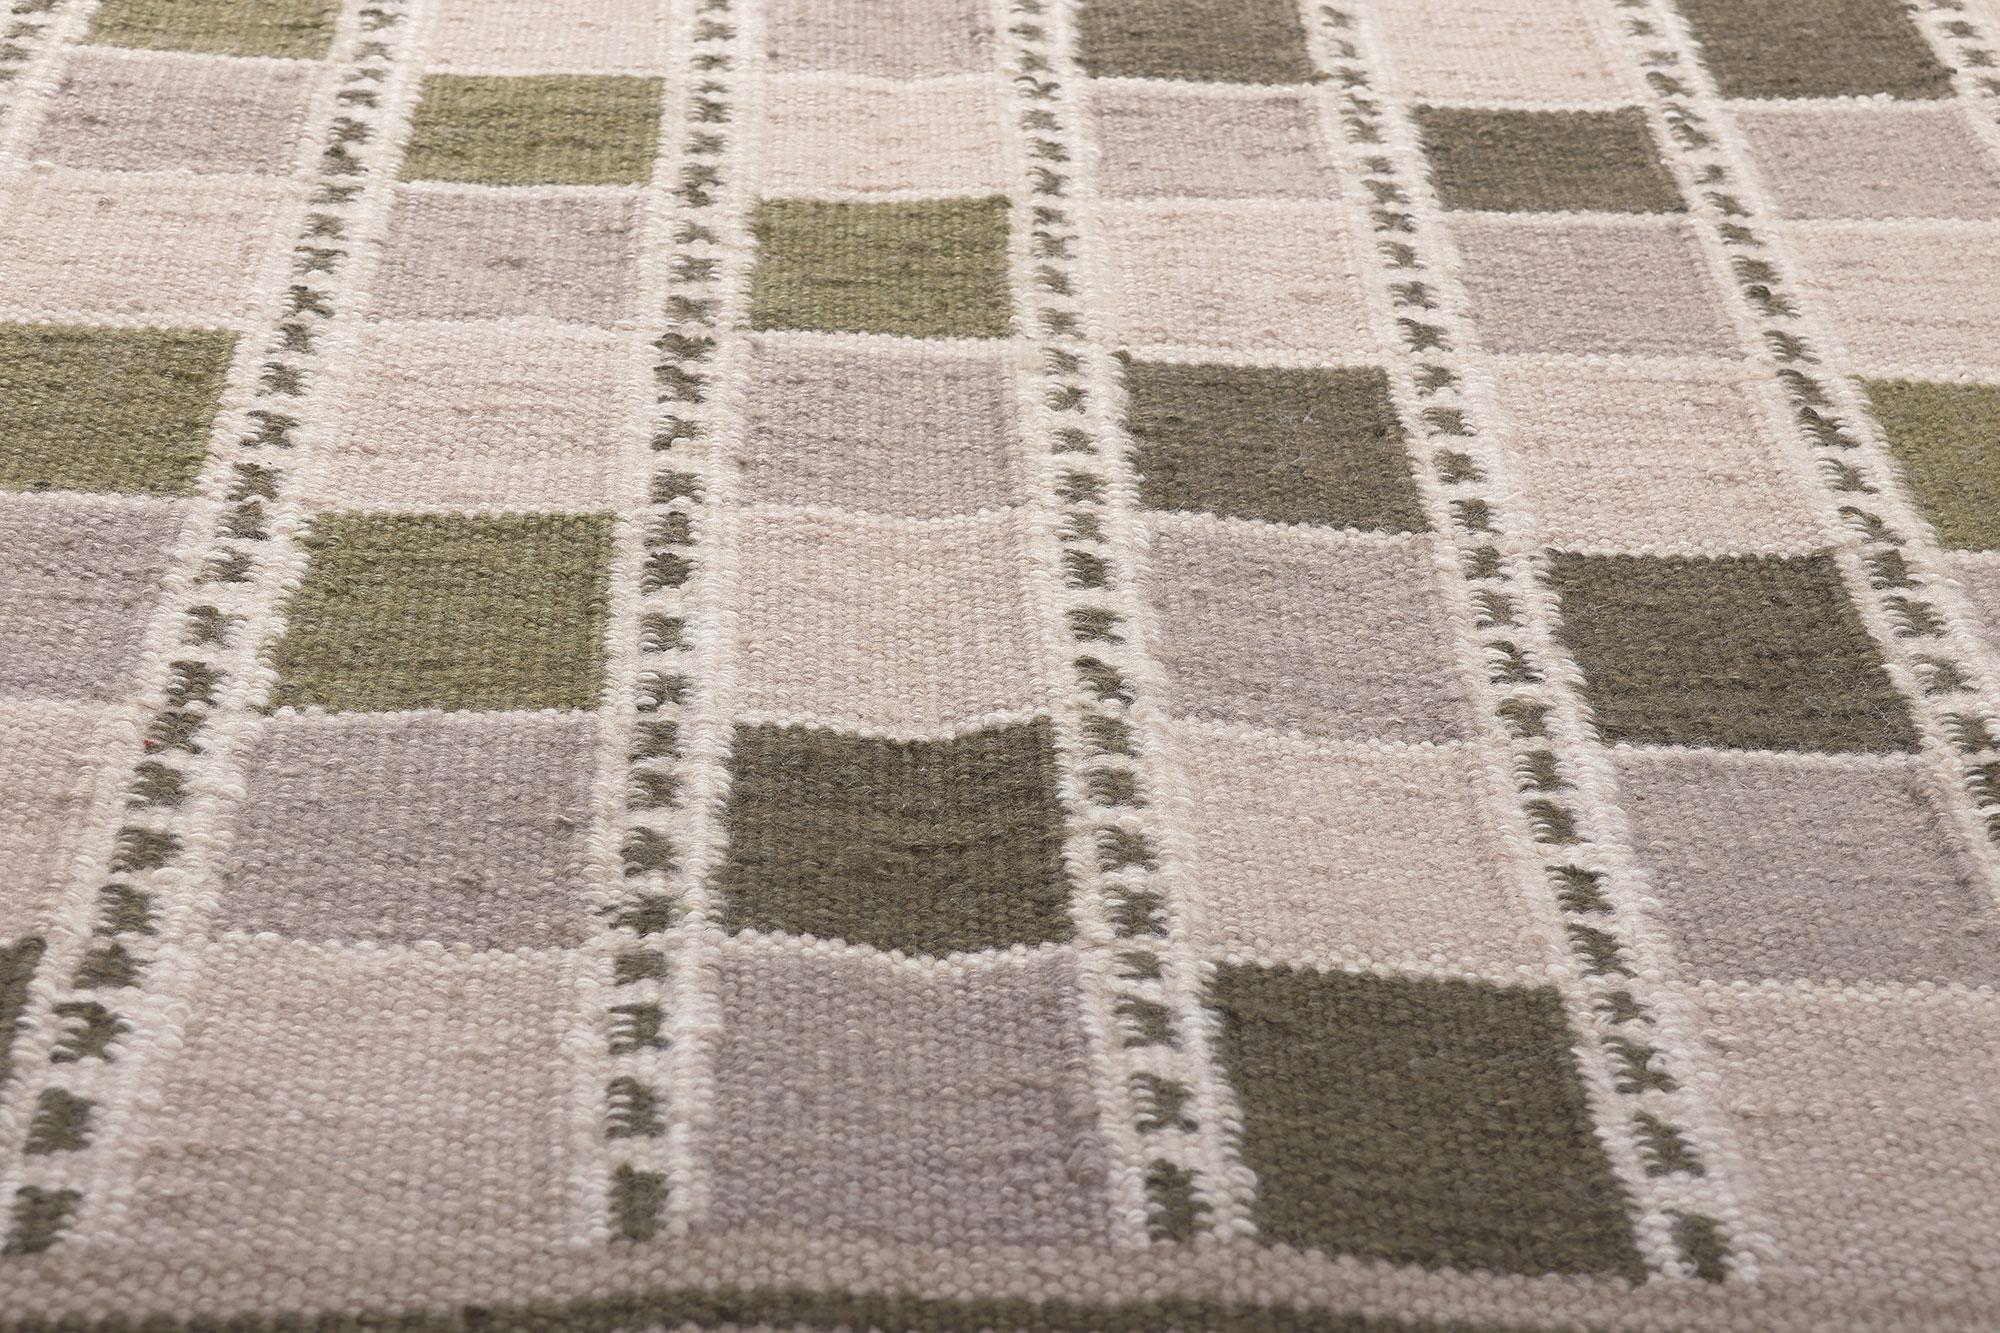 Swedish Style Kilim Rug, Scandinavian Modern Meets Japanese Zen In New Condition For Sale In Dallas, TX